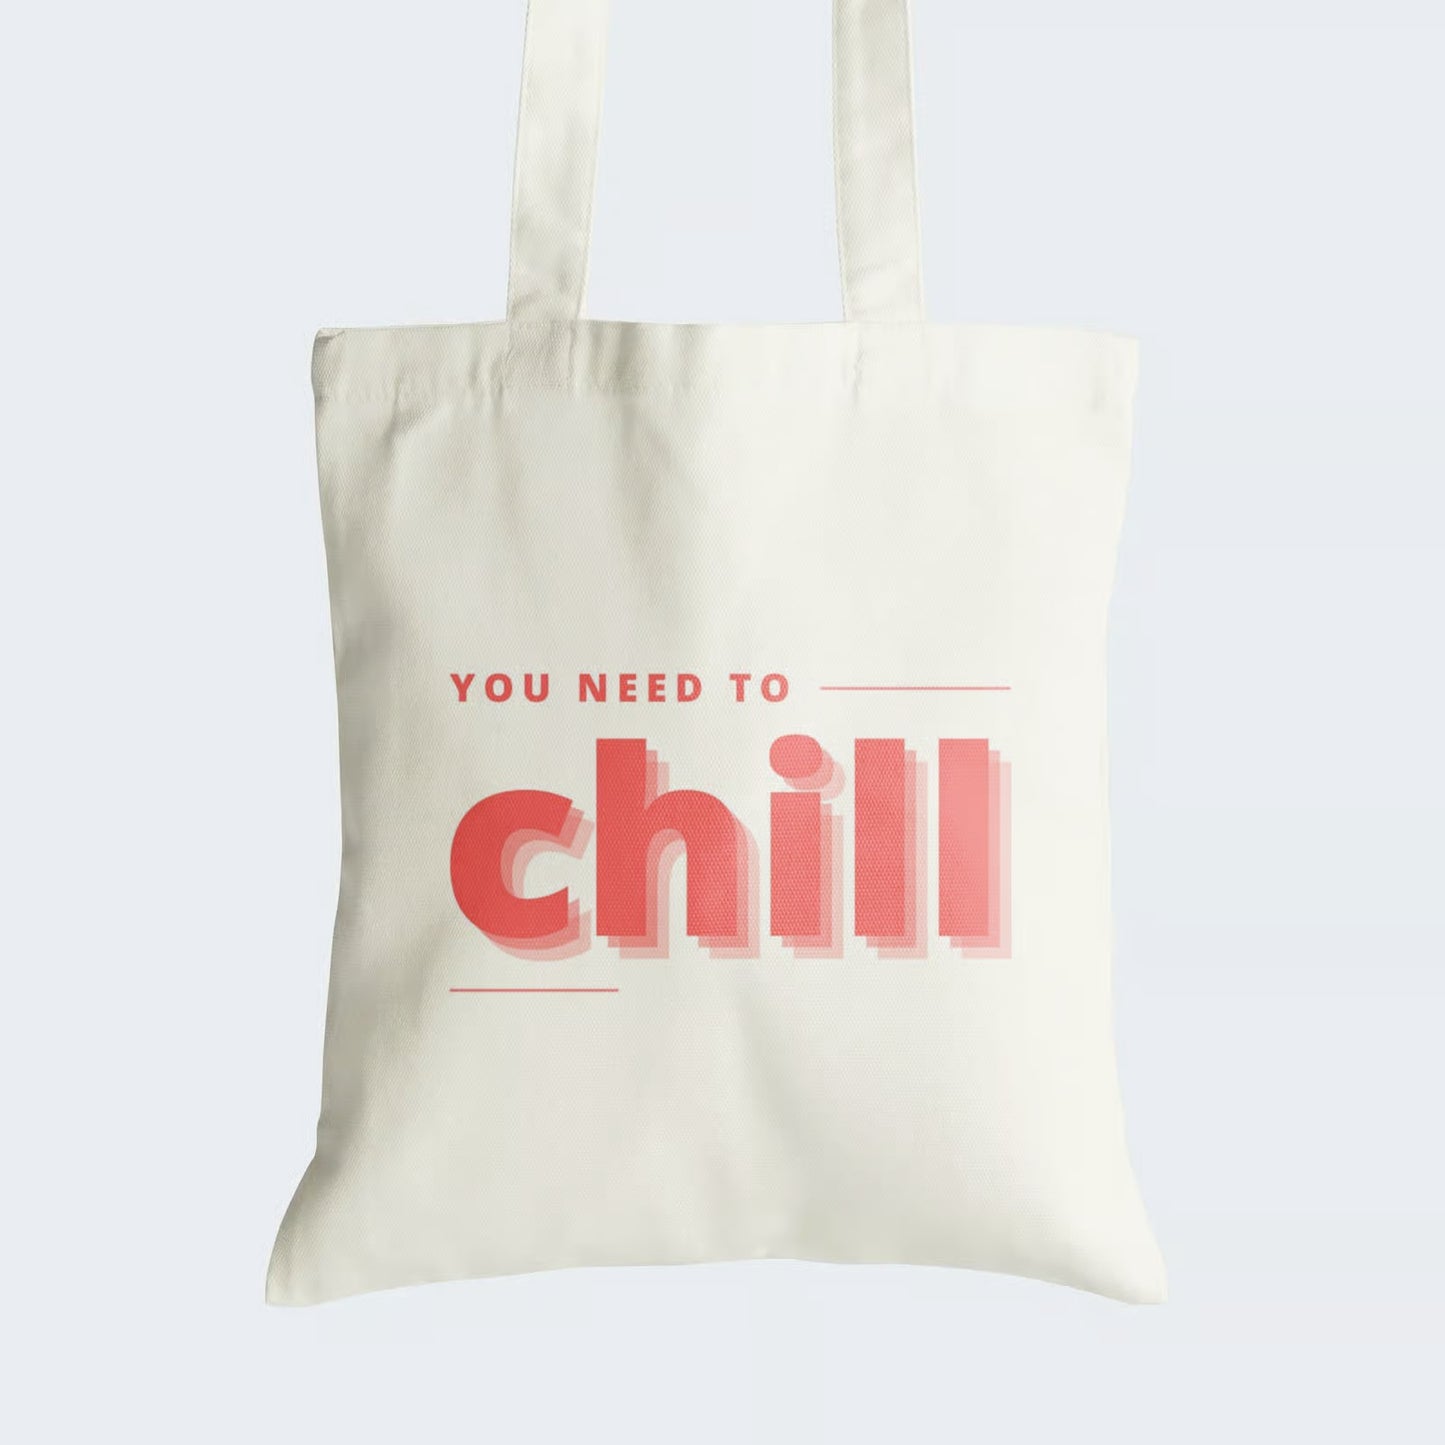 Elevate your style with our Cotton Canvas Tote Bag, boldly featuring the graphic text "YOU NEED TO chill." This playful and stylish accessory not only makes a statement but also offers durability with a secure zipper closure. Choose sustainability while showcasing your attitude. Elevate your accessory game with our "YOU NEED TO chill" Cotton Canvas Tote Bag - order now and carry a touch of boldness wherever you go!